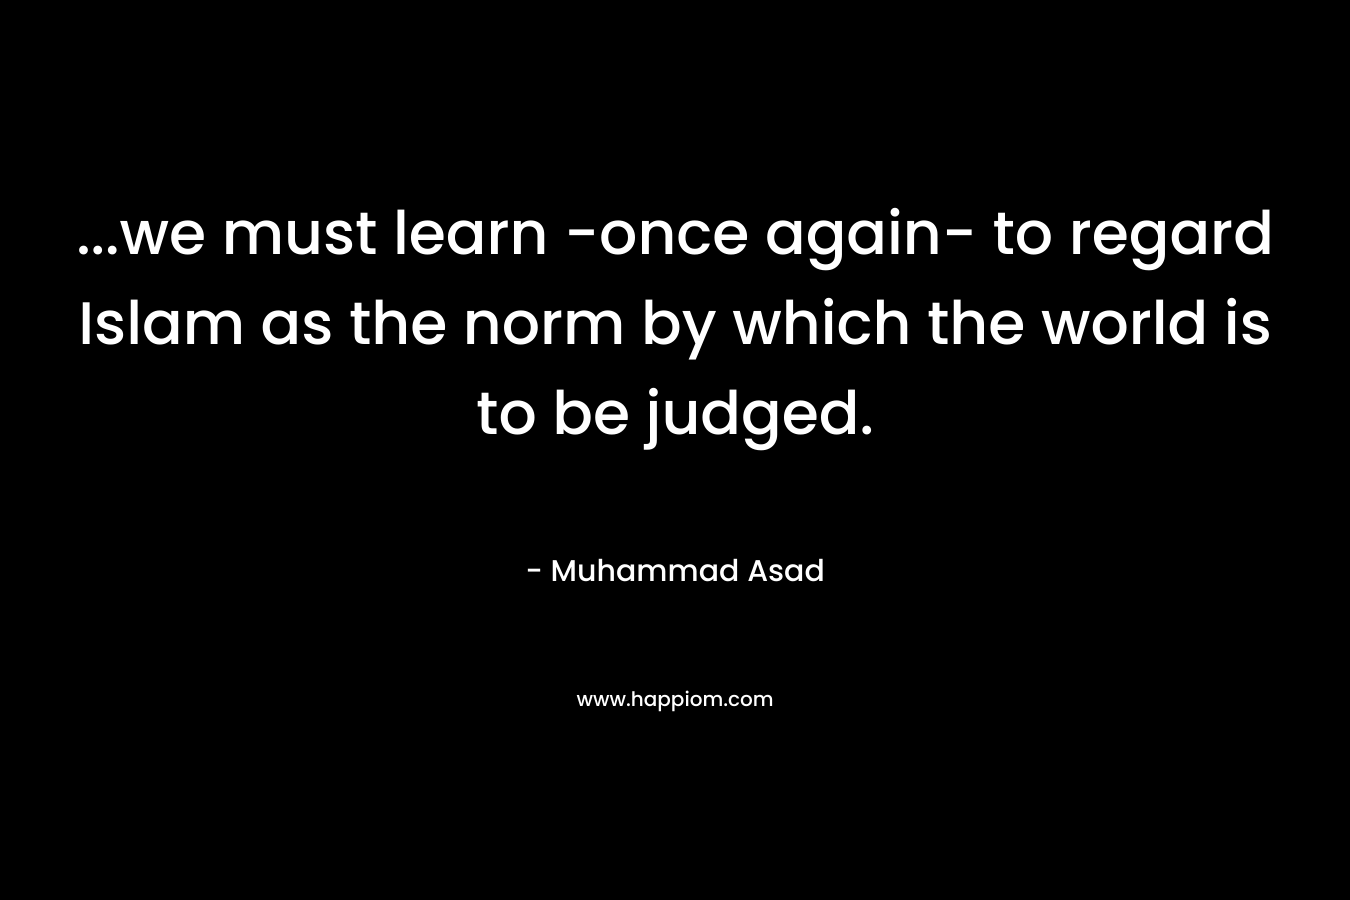 …we must learn -once again- to regard Islam as the norm by which the world is to be judged. – Muhammad Asad